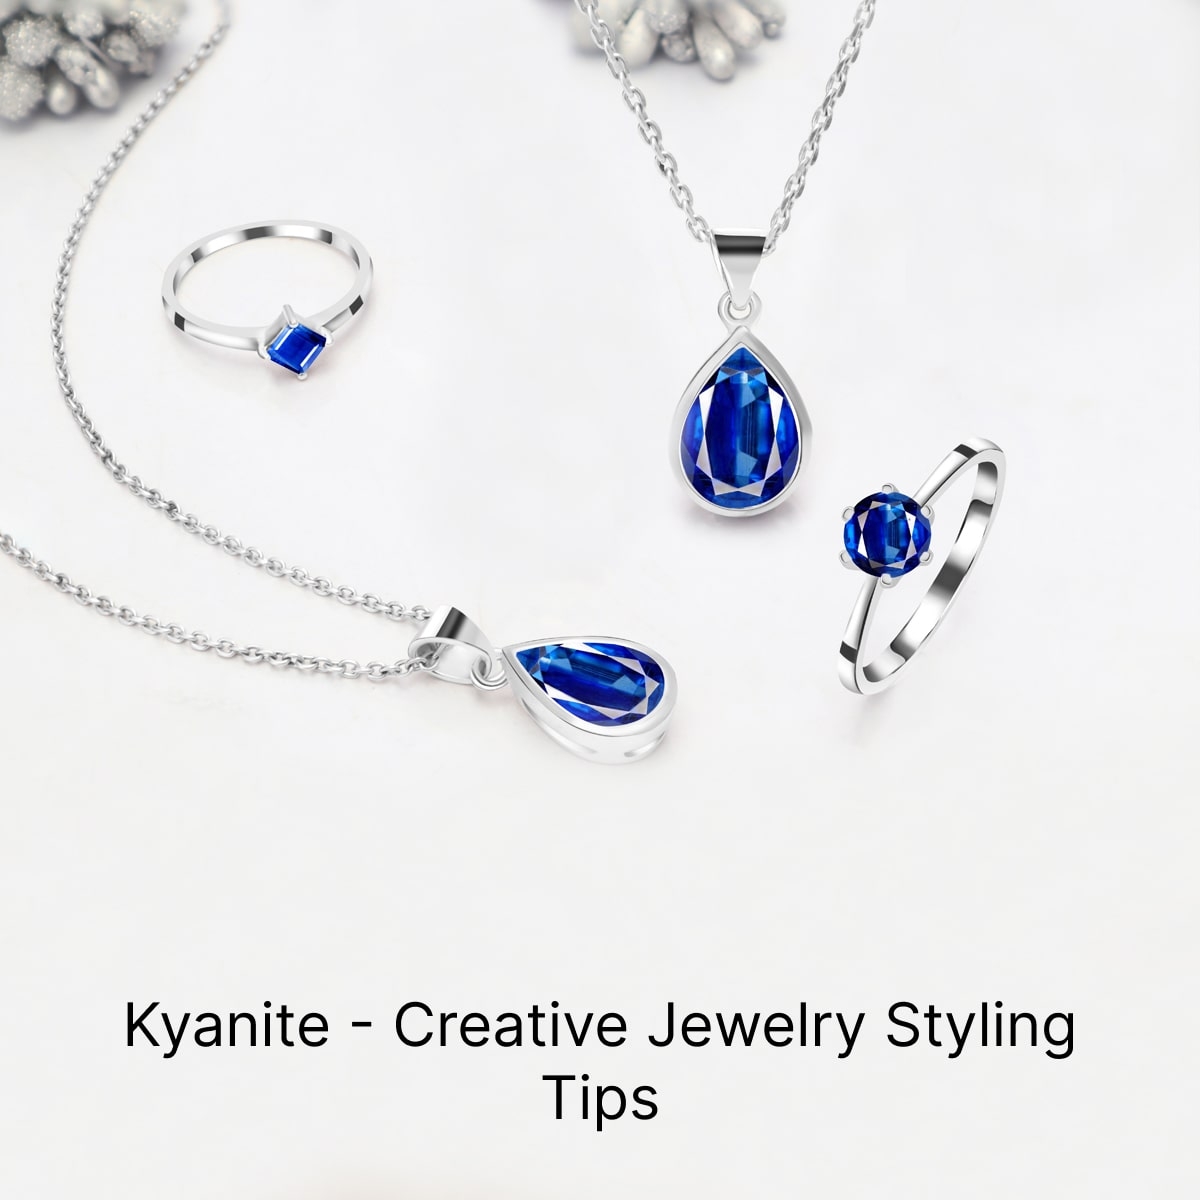 Styling Tips and Ideas to Wear Kyanite Jewelry